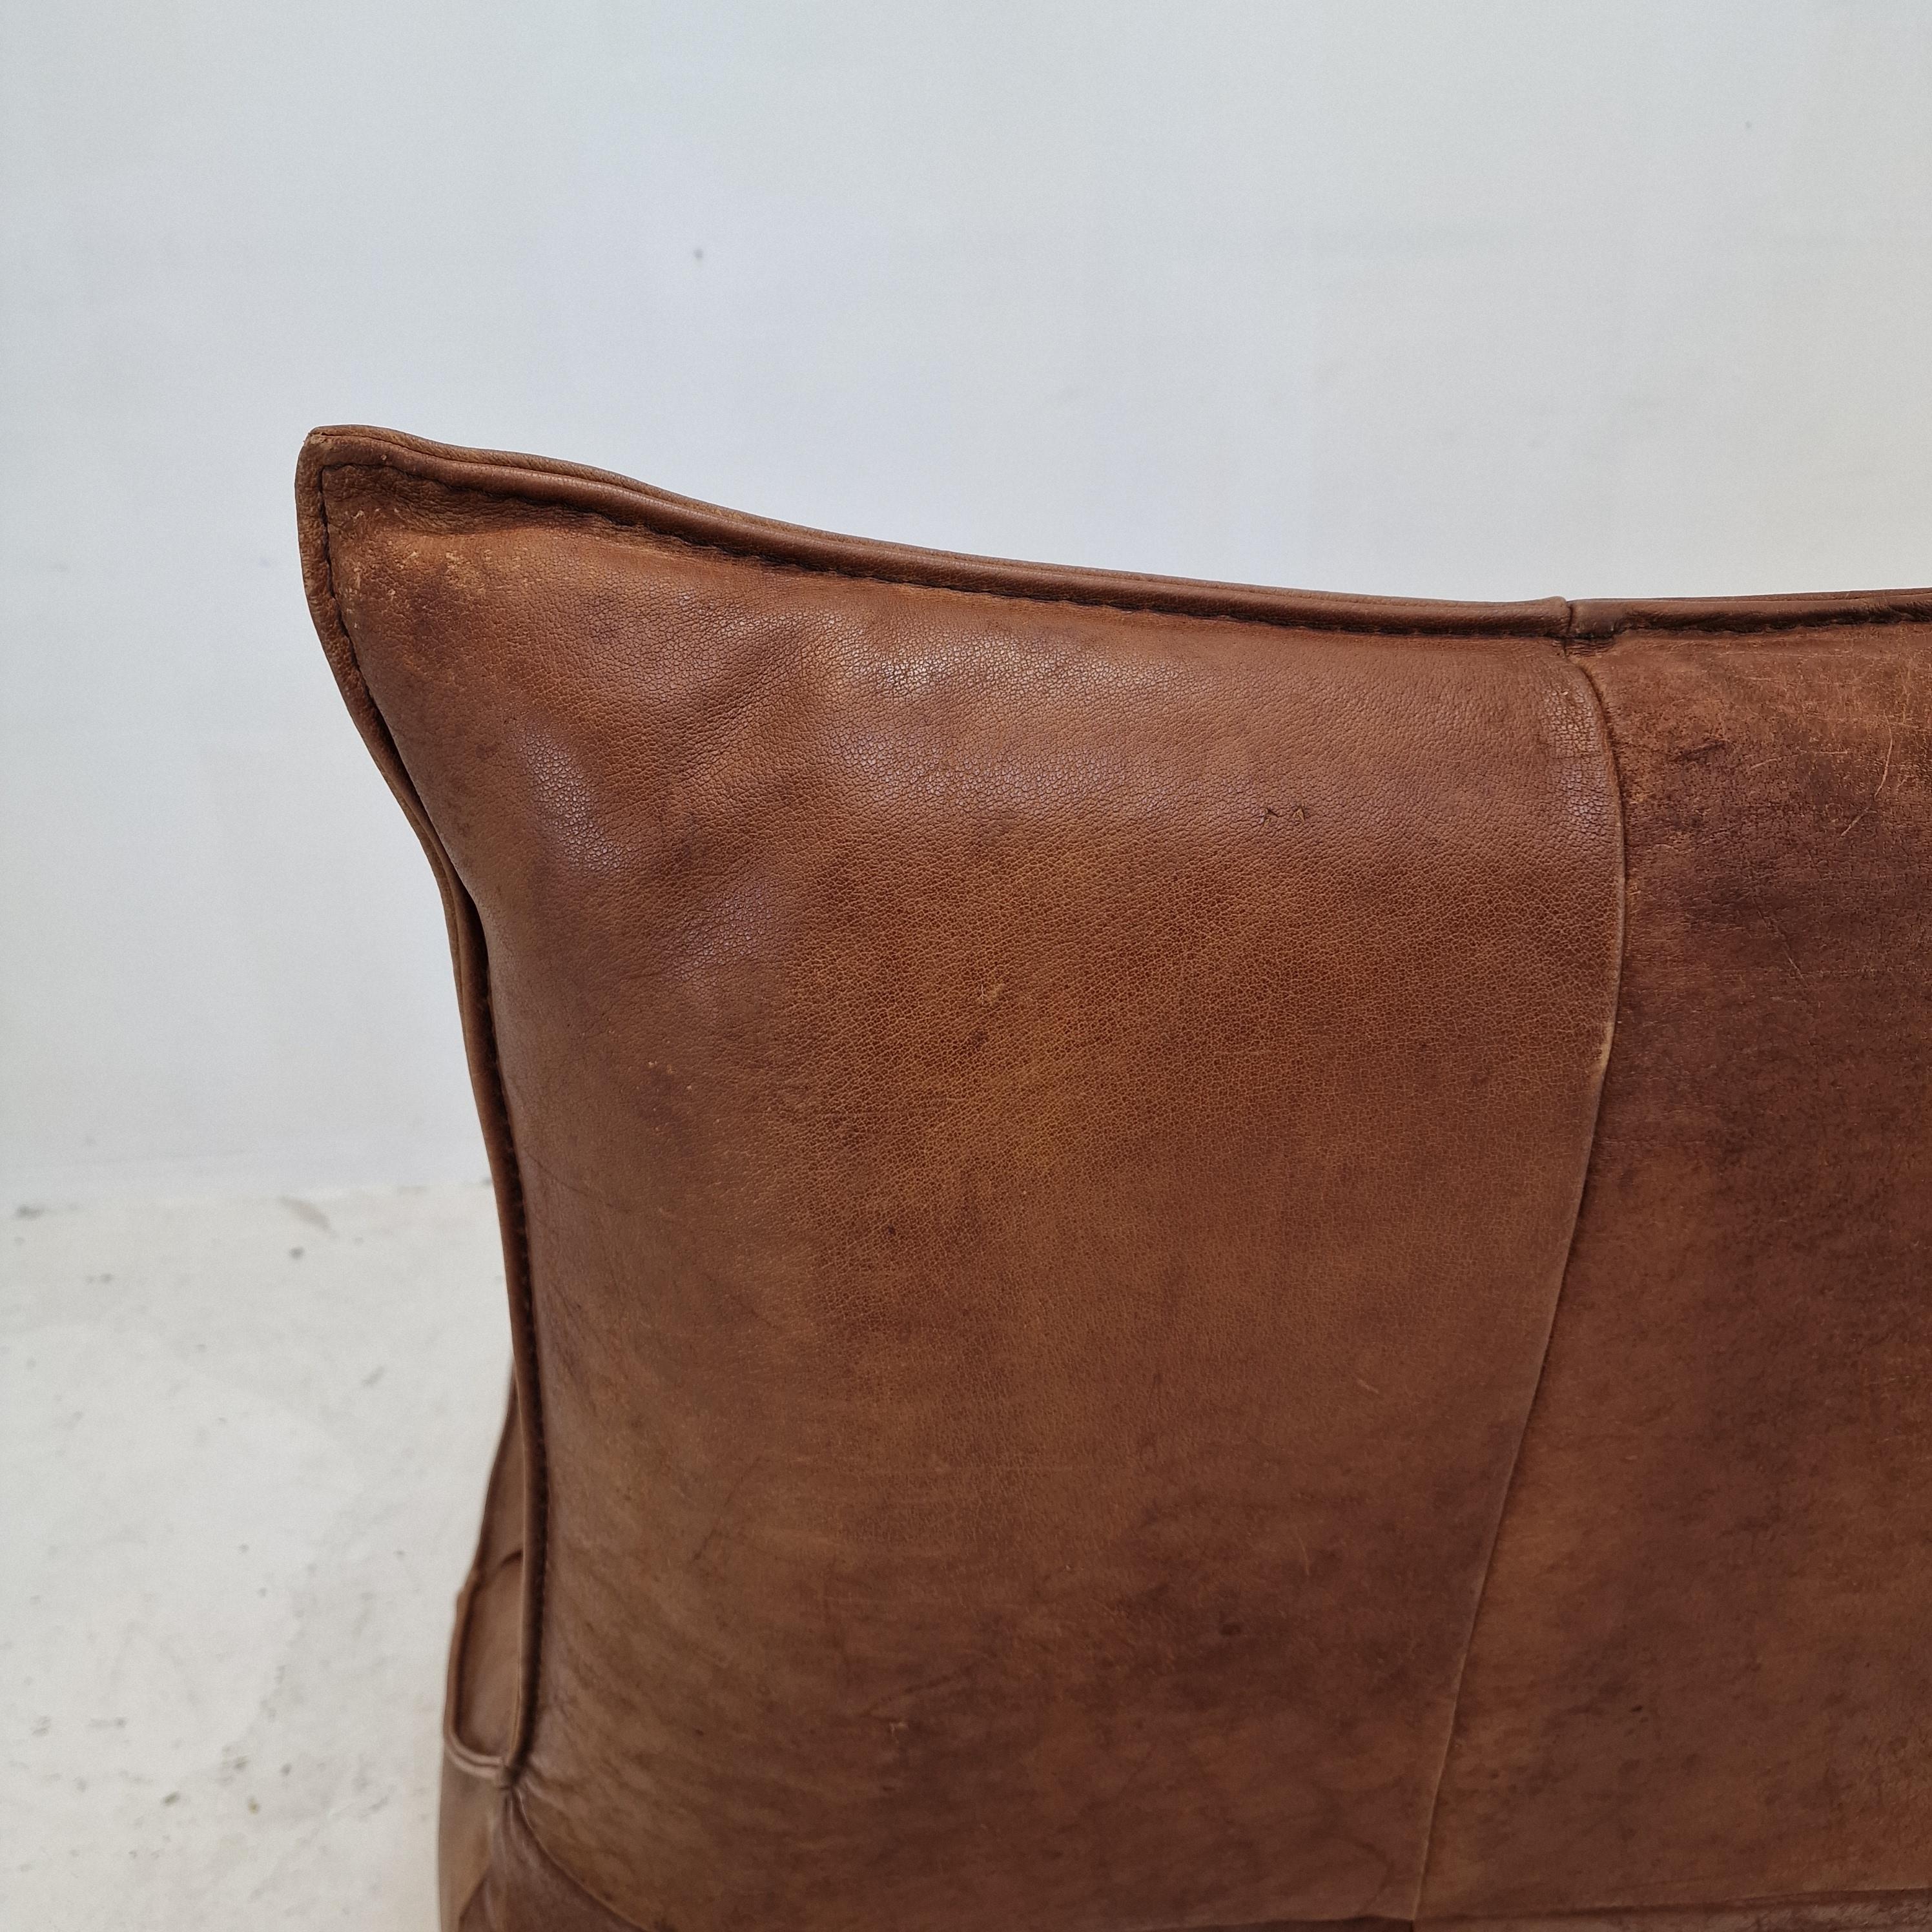 Montis “The Rock” Sofa In Brown Leather By Gerard Van Den Berg, 1970s For Sale 7